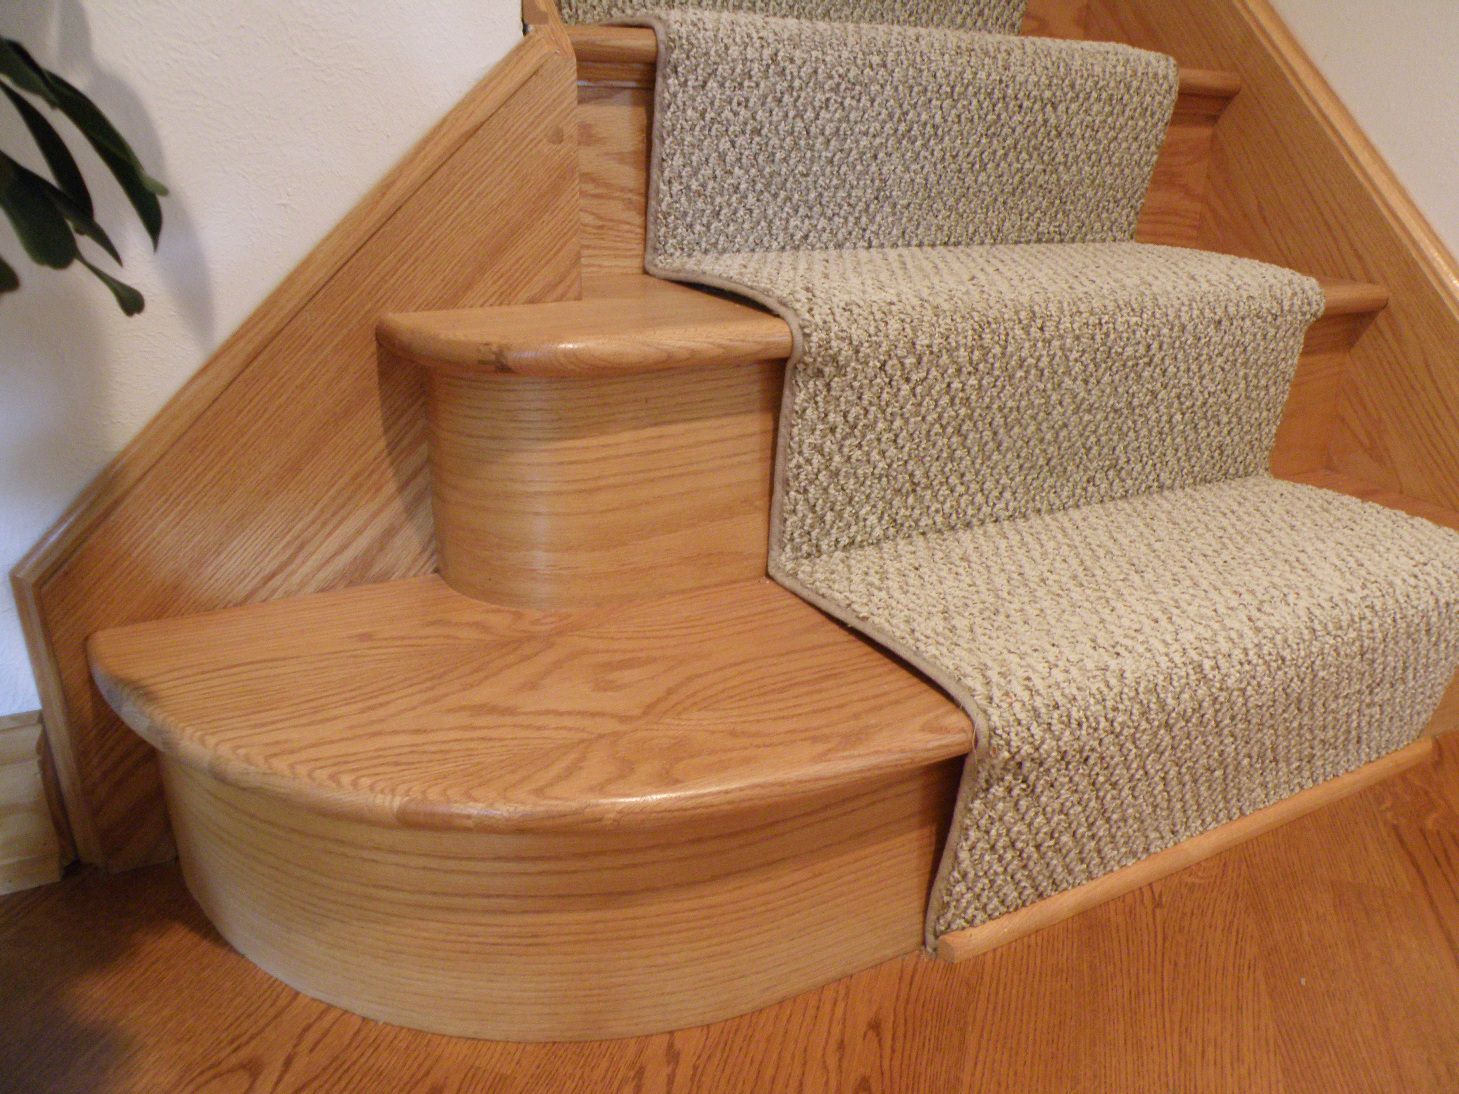 Installing-Carpet-On-Stairs-Cost